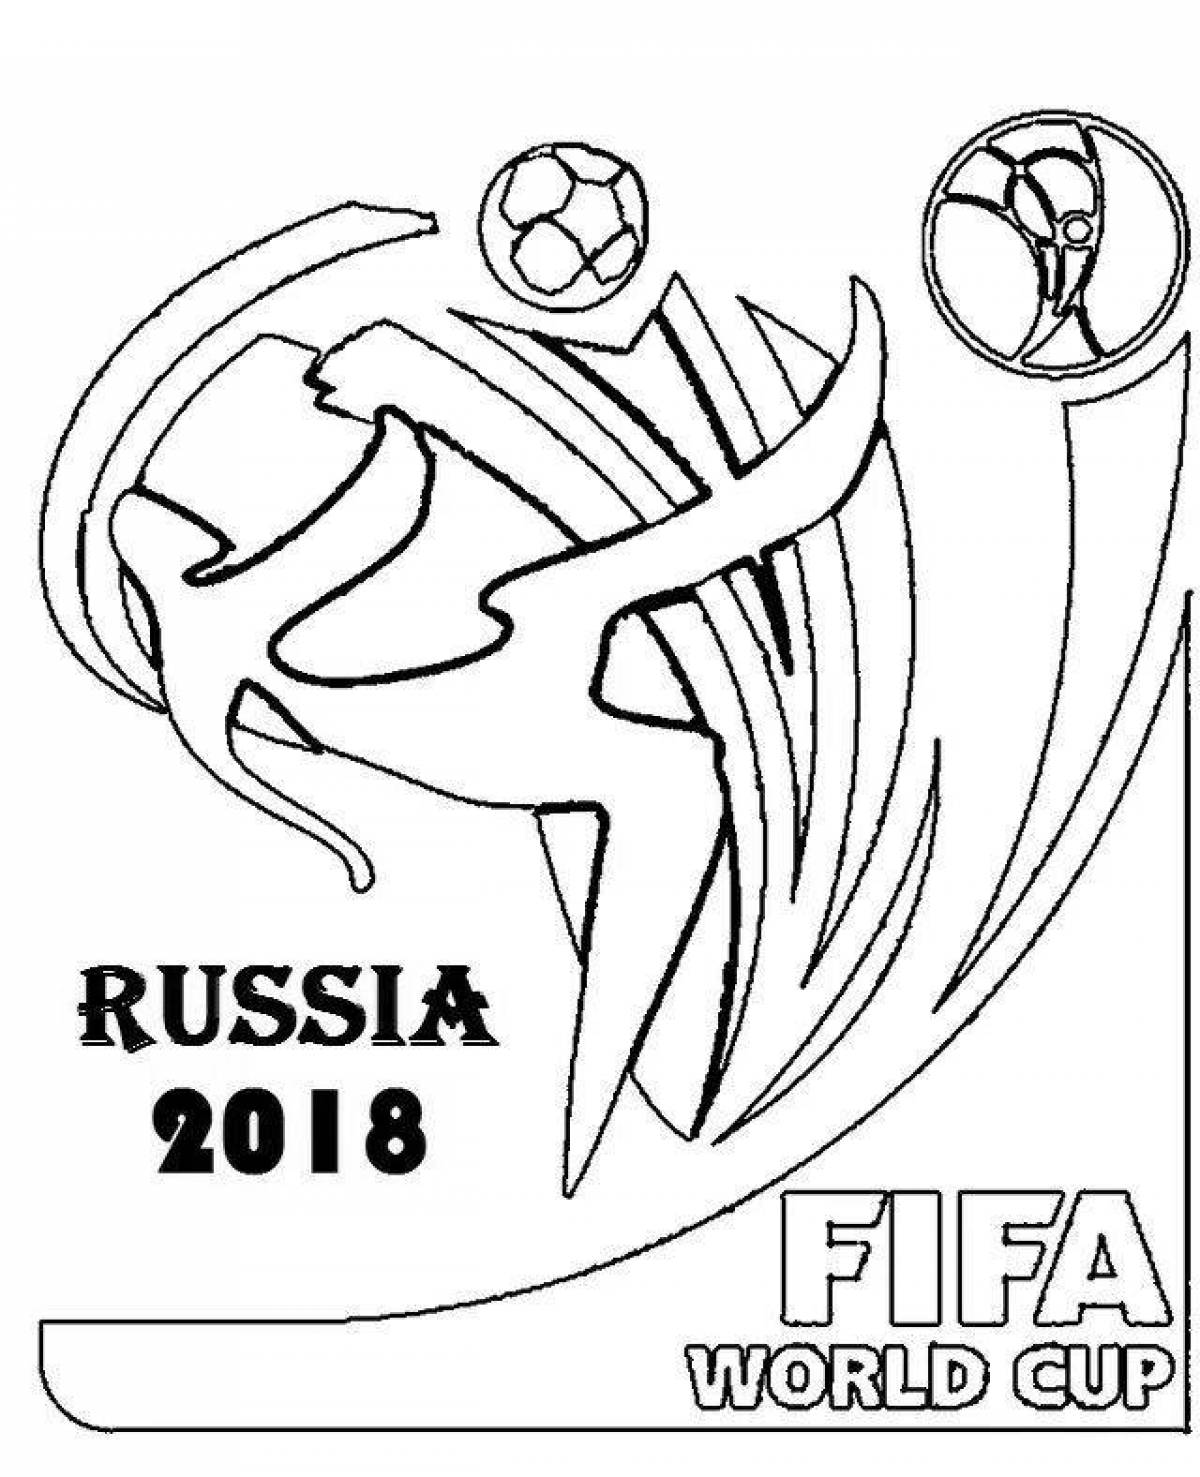 Coloring page of the World Cup